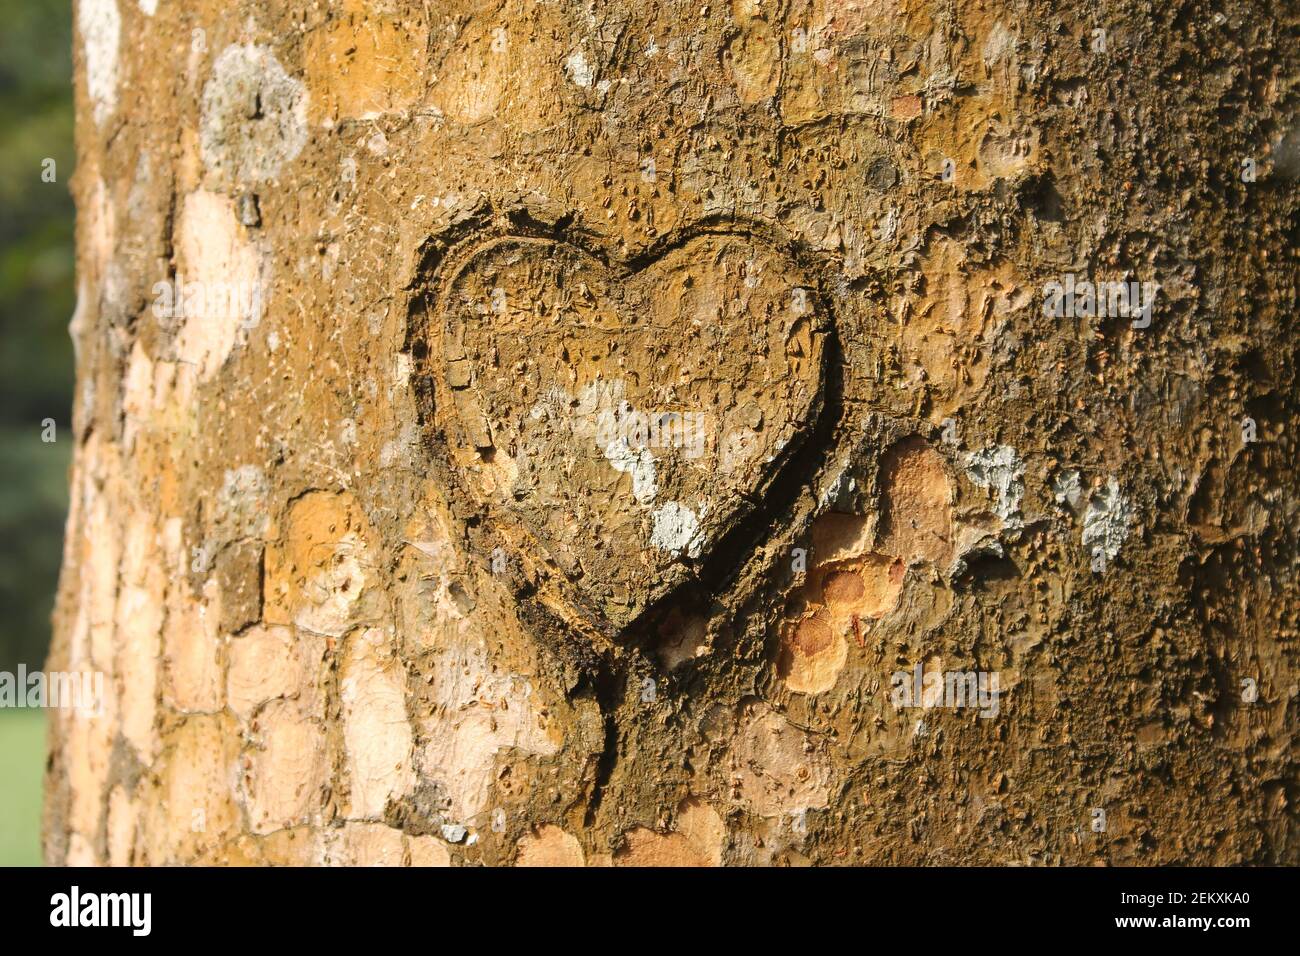 Heart Shape Carved On Tree Trunk in Forest Stock Photo